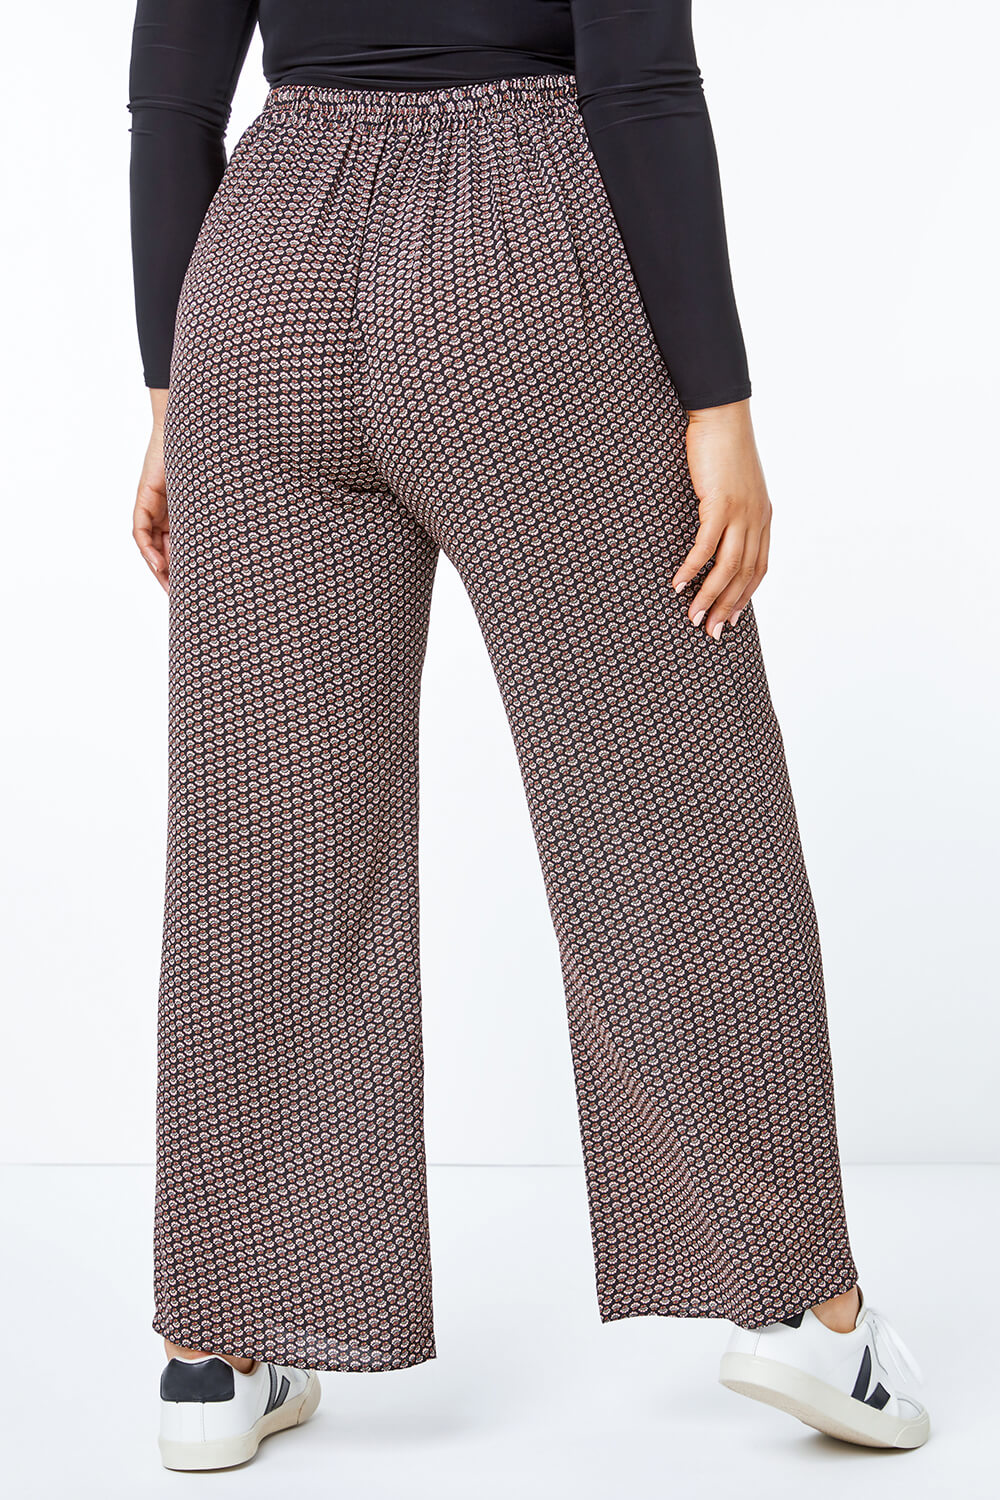 Mocha Curve Printed Wide Leg Trousers, Image 3 of 5